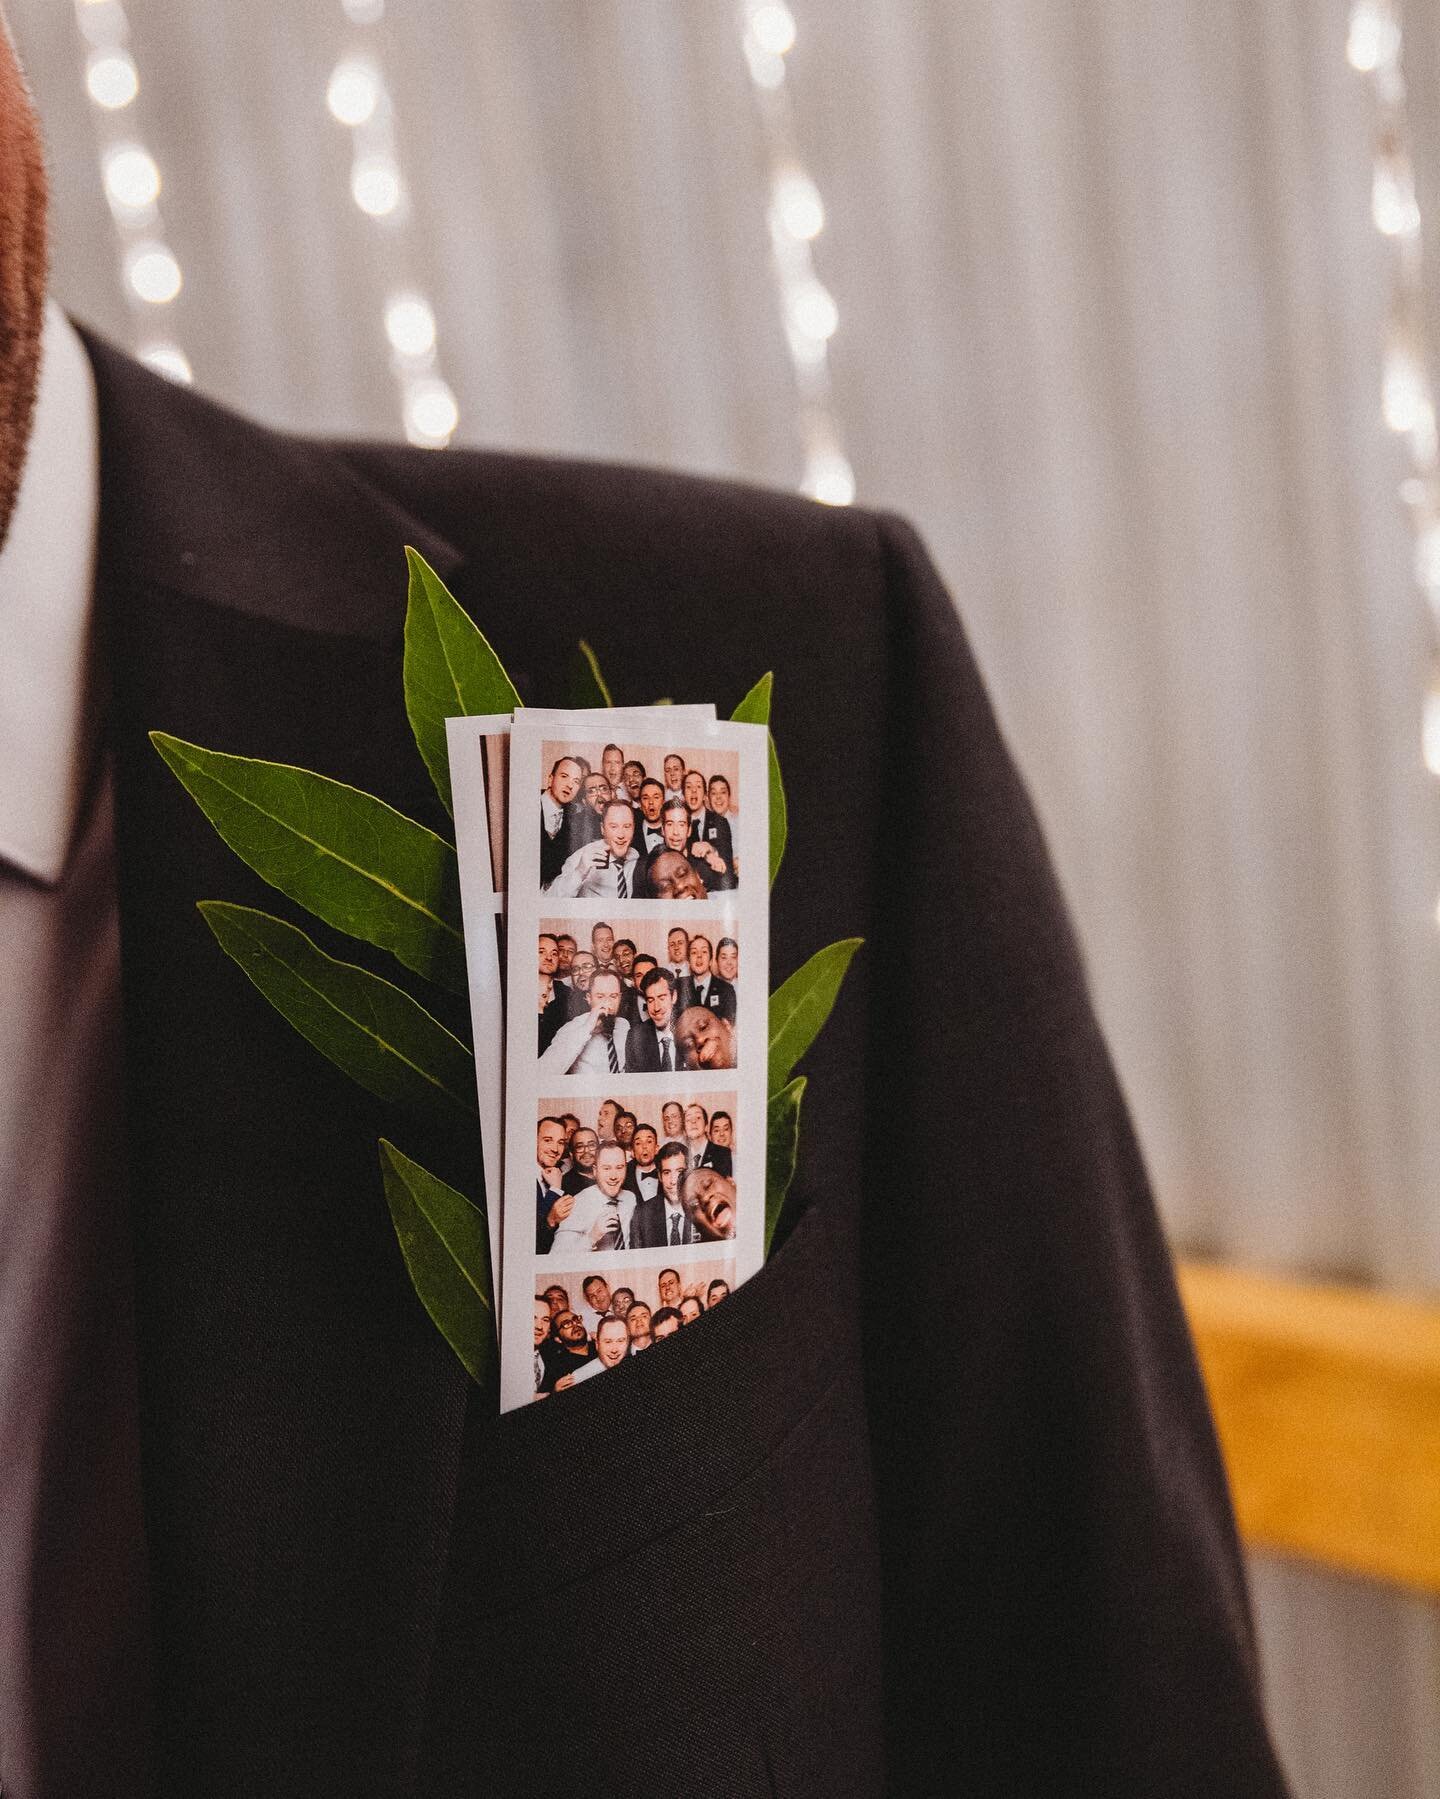 Cute pocket Sir, can I take a picture of it? 😜

#photobooth #luxephotobooth #waldarawedding #oberonnsw #smile #weddingguest #photography